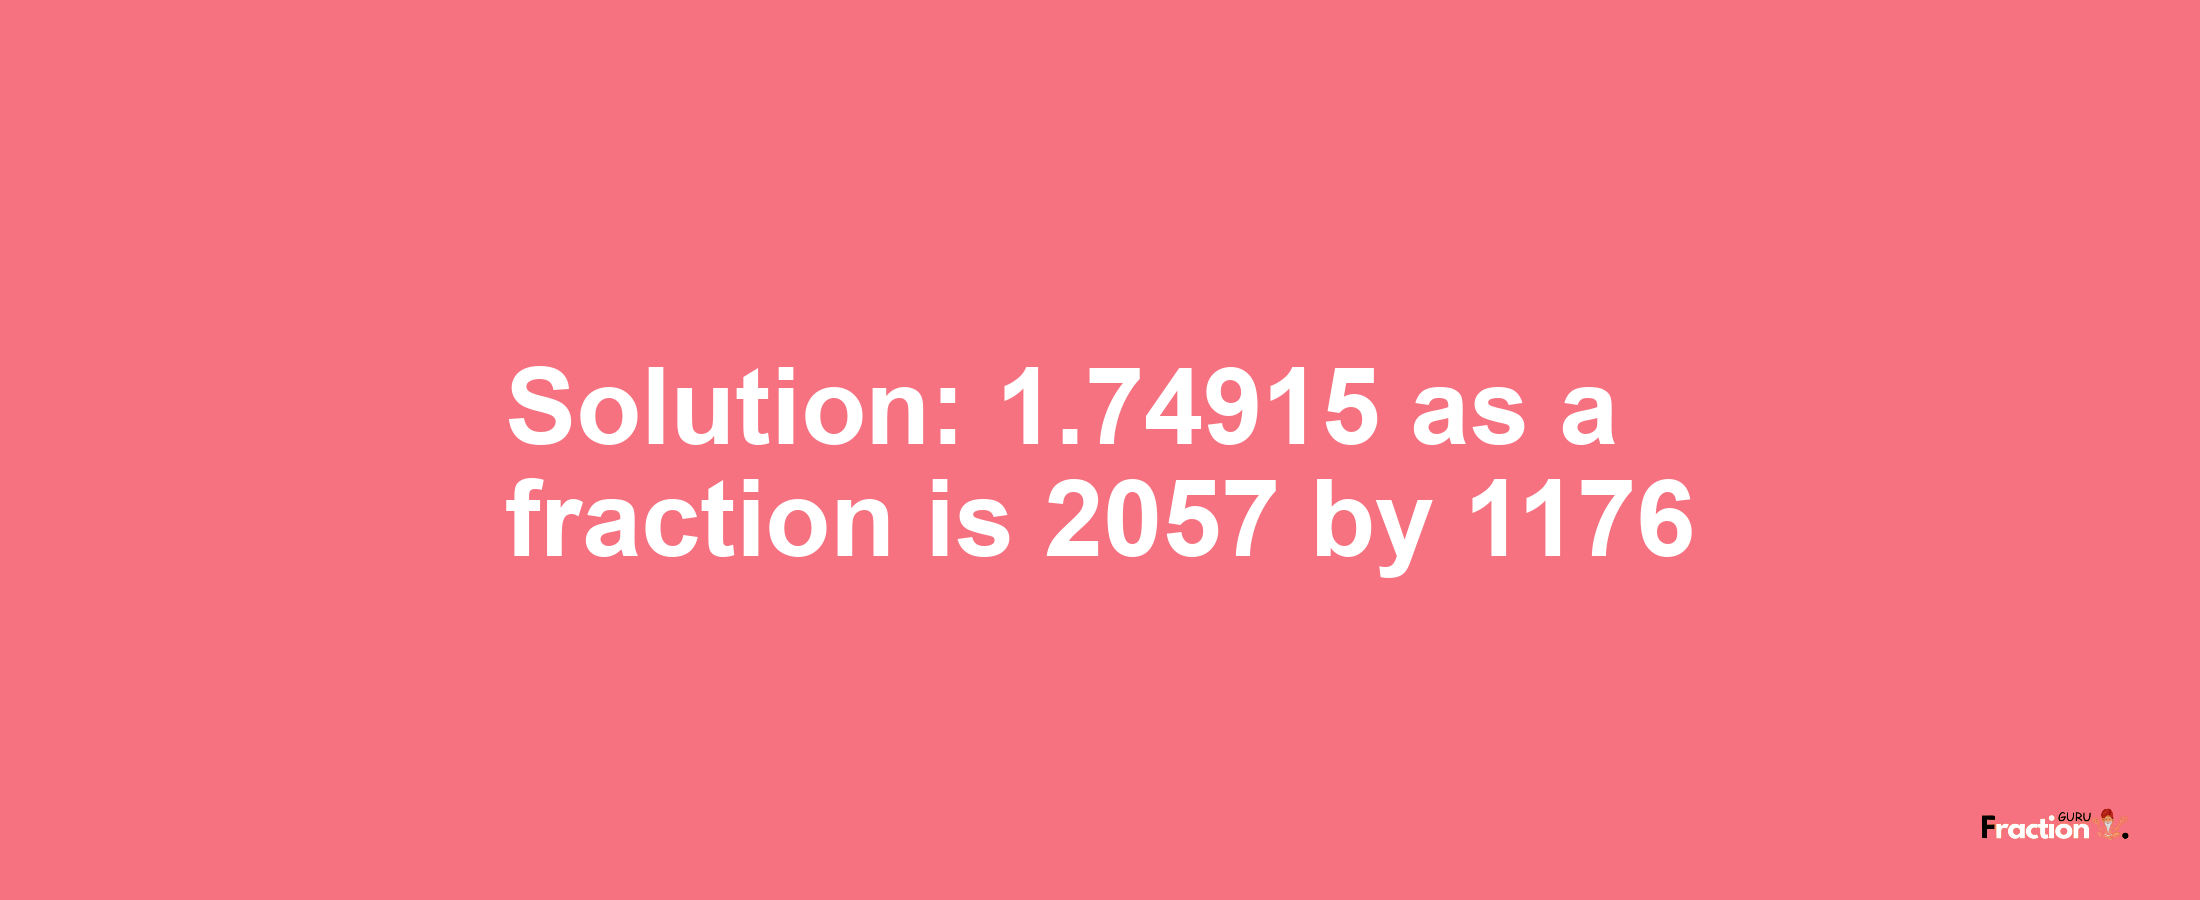 Solution:1.74915 as a fraction is 2057/1176